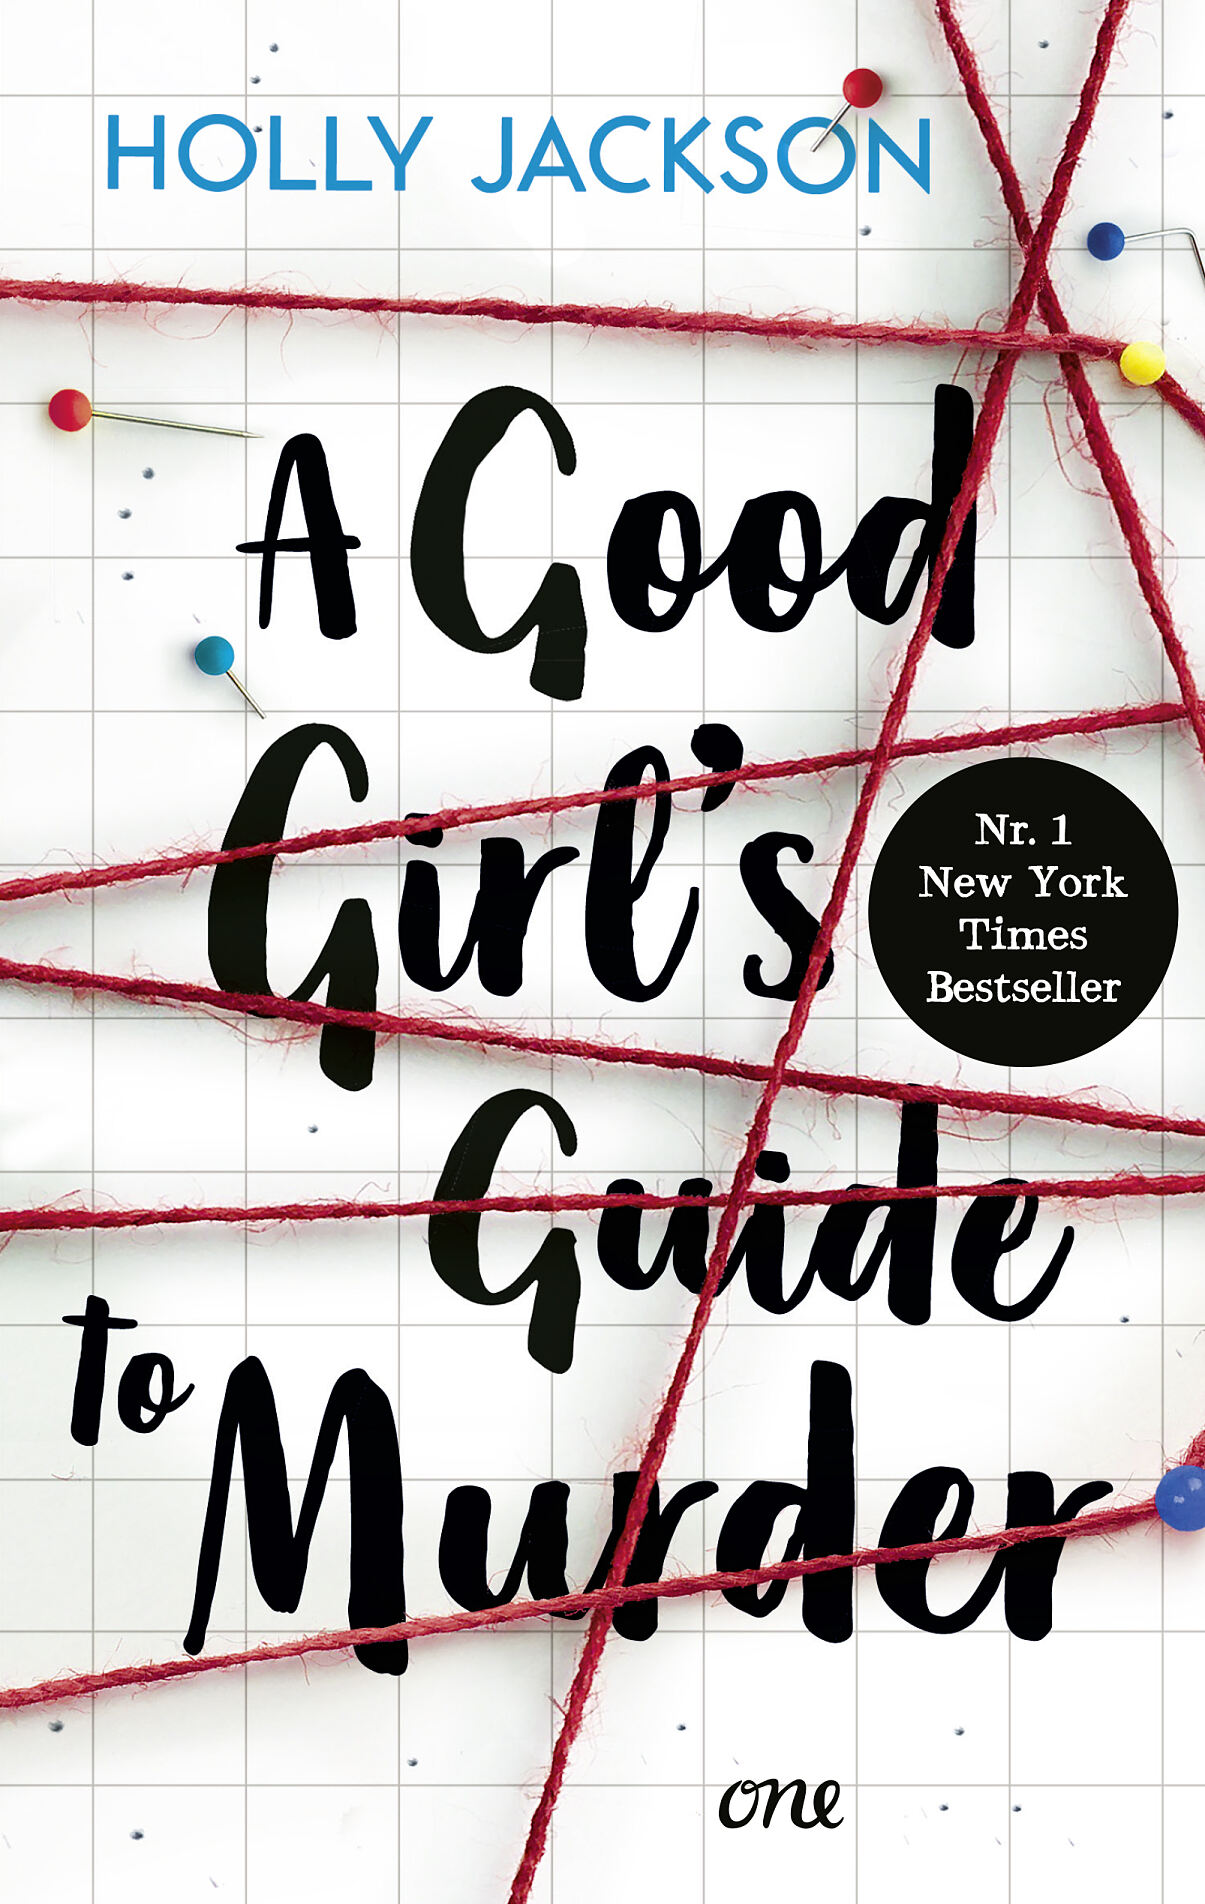 Jackson H - A good girls guide to murder